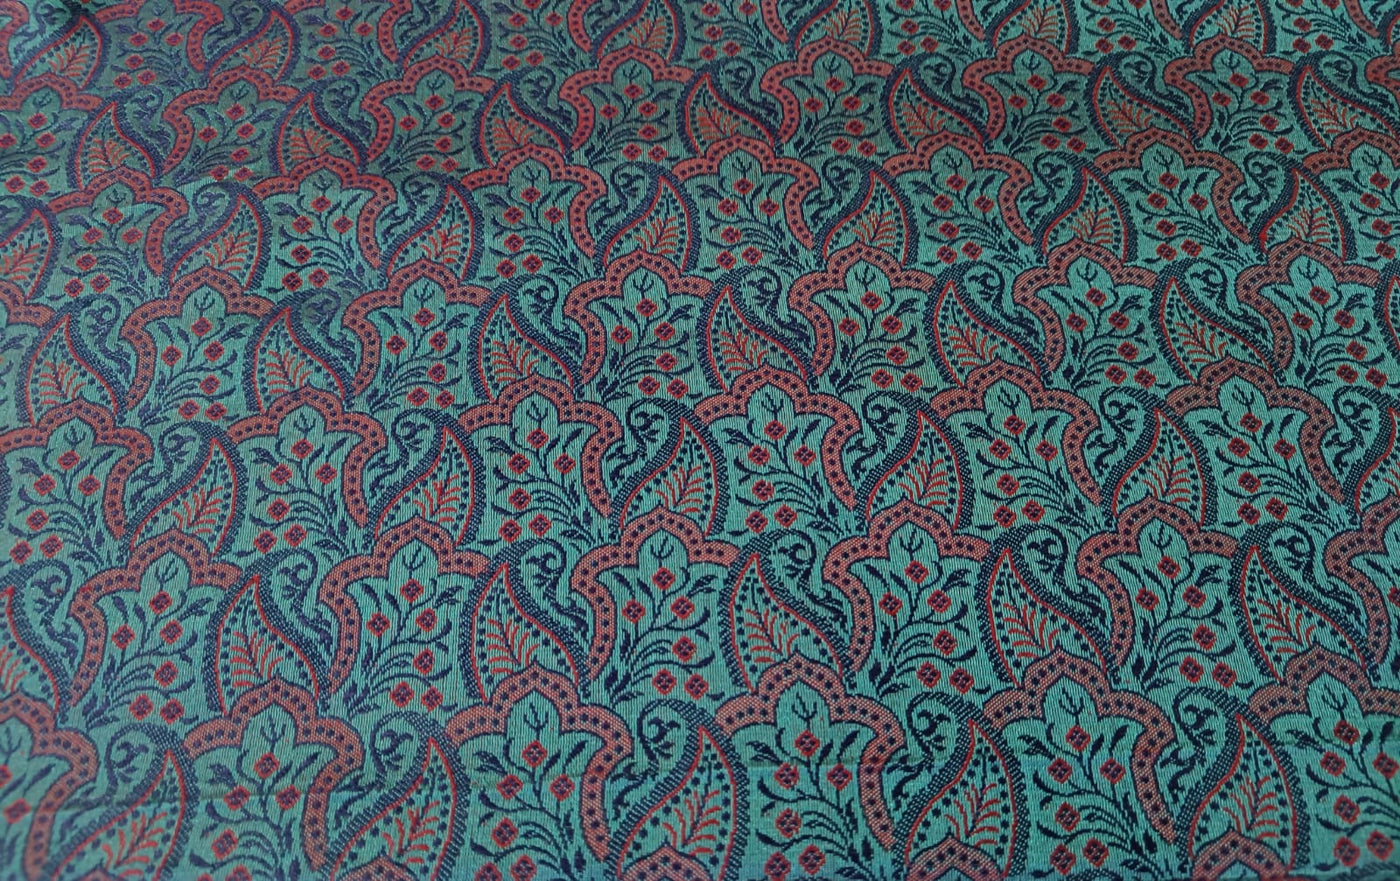 Brocade Fabric Turquoise Blue & Pink Paisleys 44" wide BRO17[6] available for bulk preorder